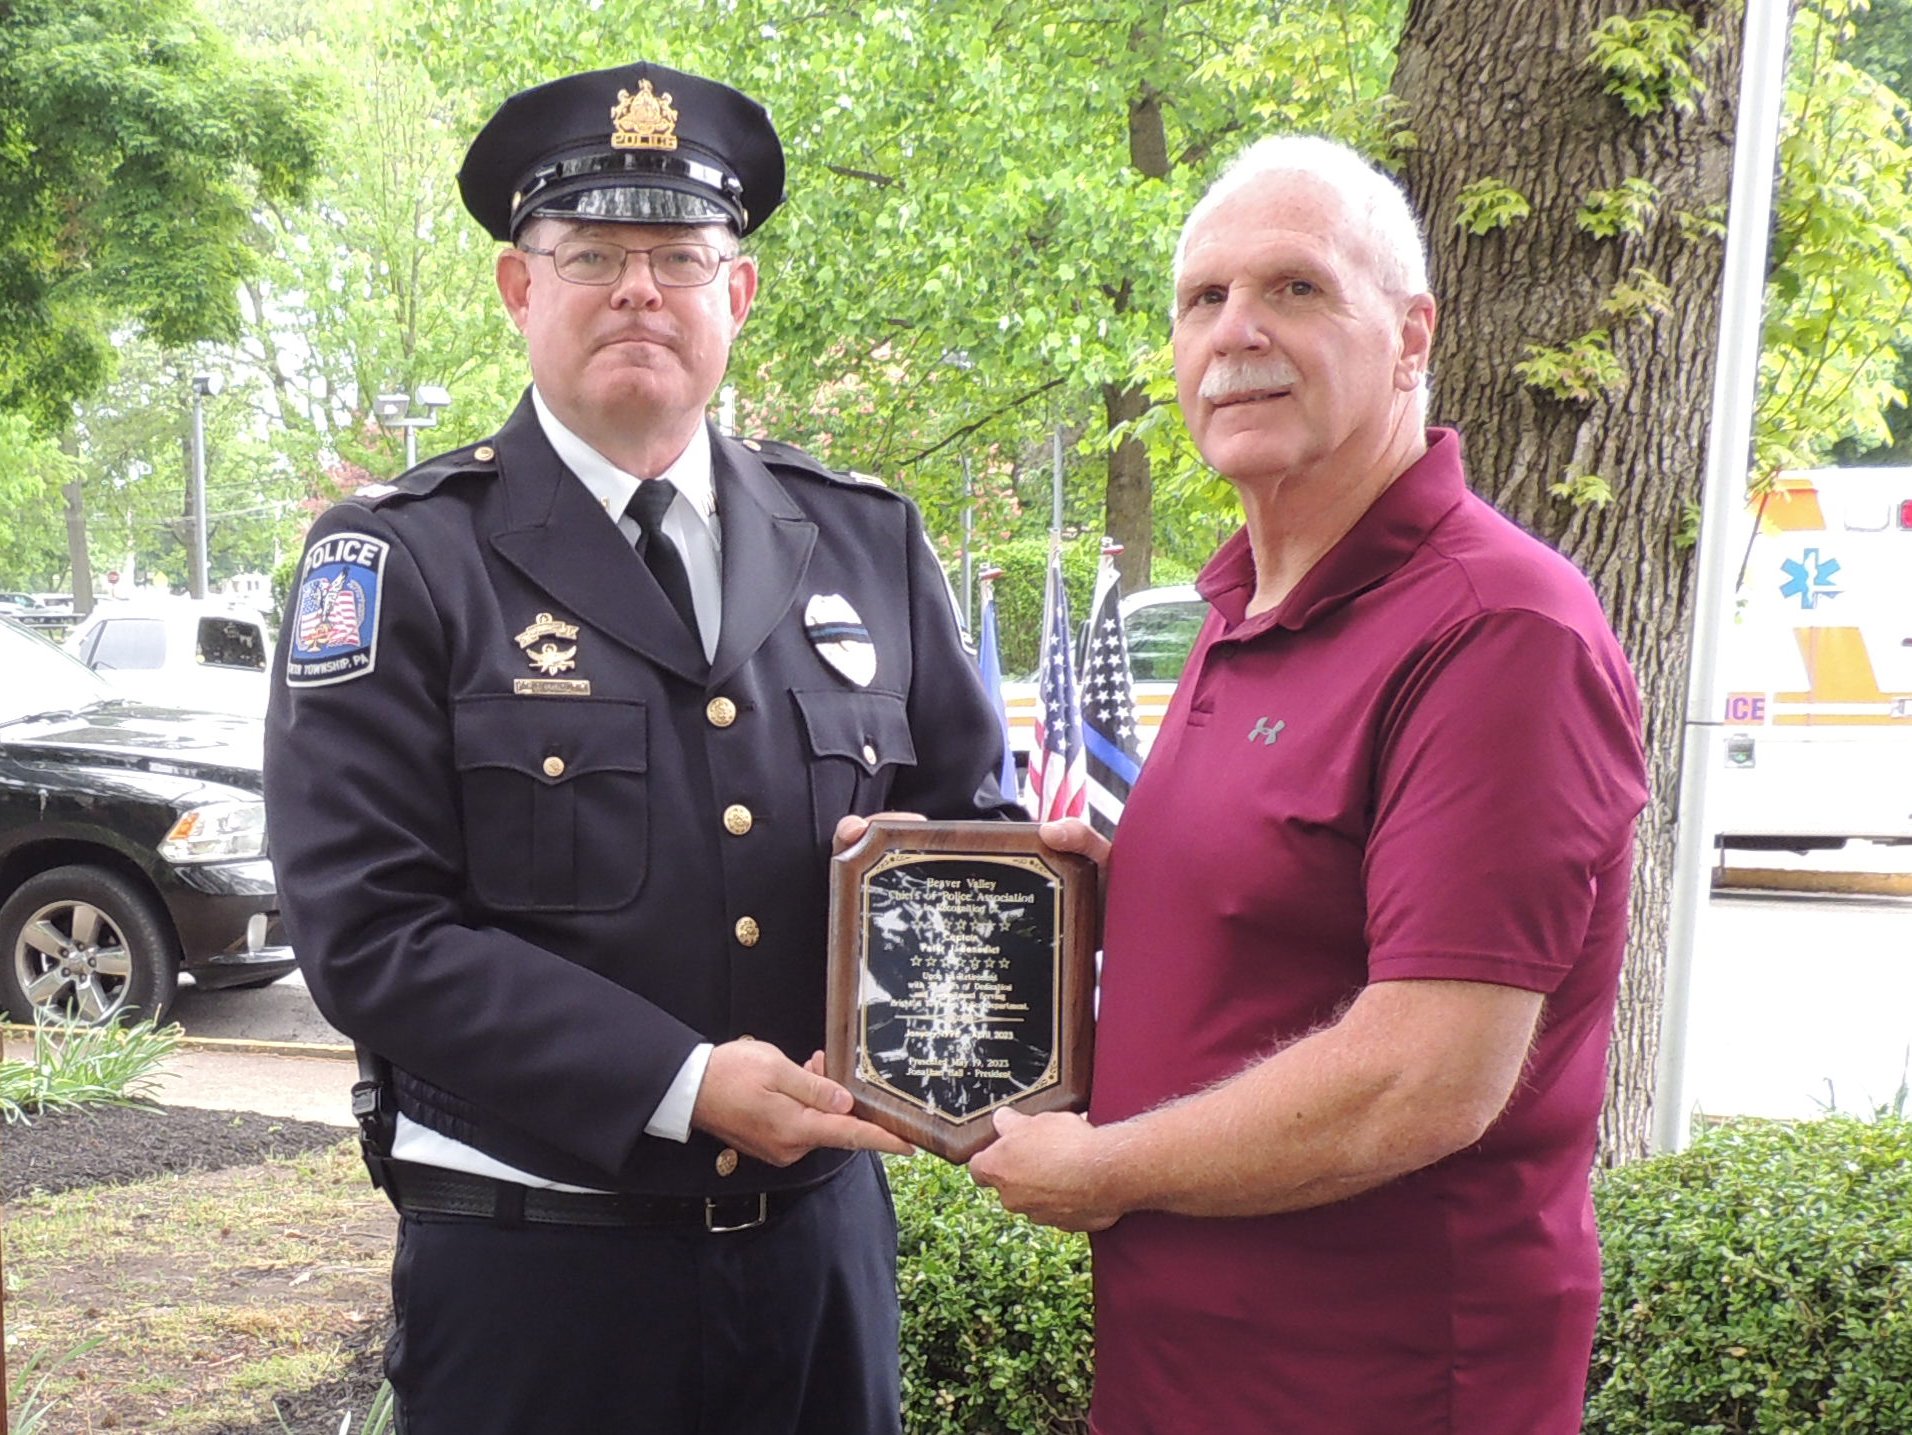 Captain Jonathan Hall presents a retirement plaque to Captain Peter J. Benedict for his 27 years of service to Brighton Township Police Department.